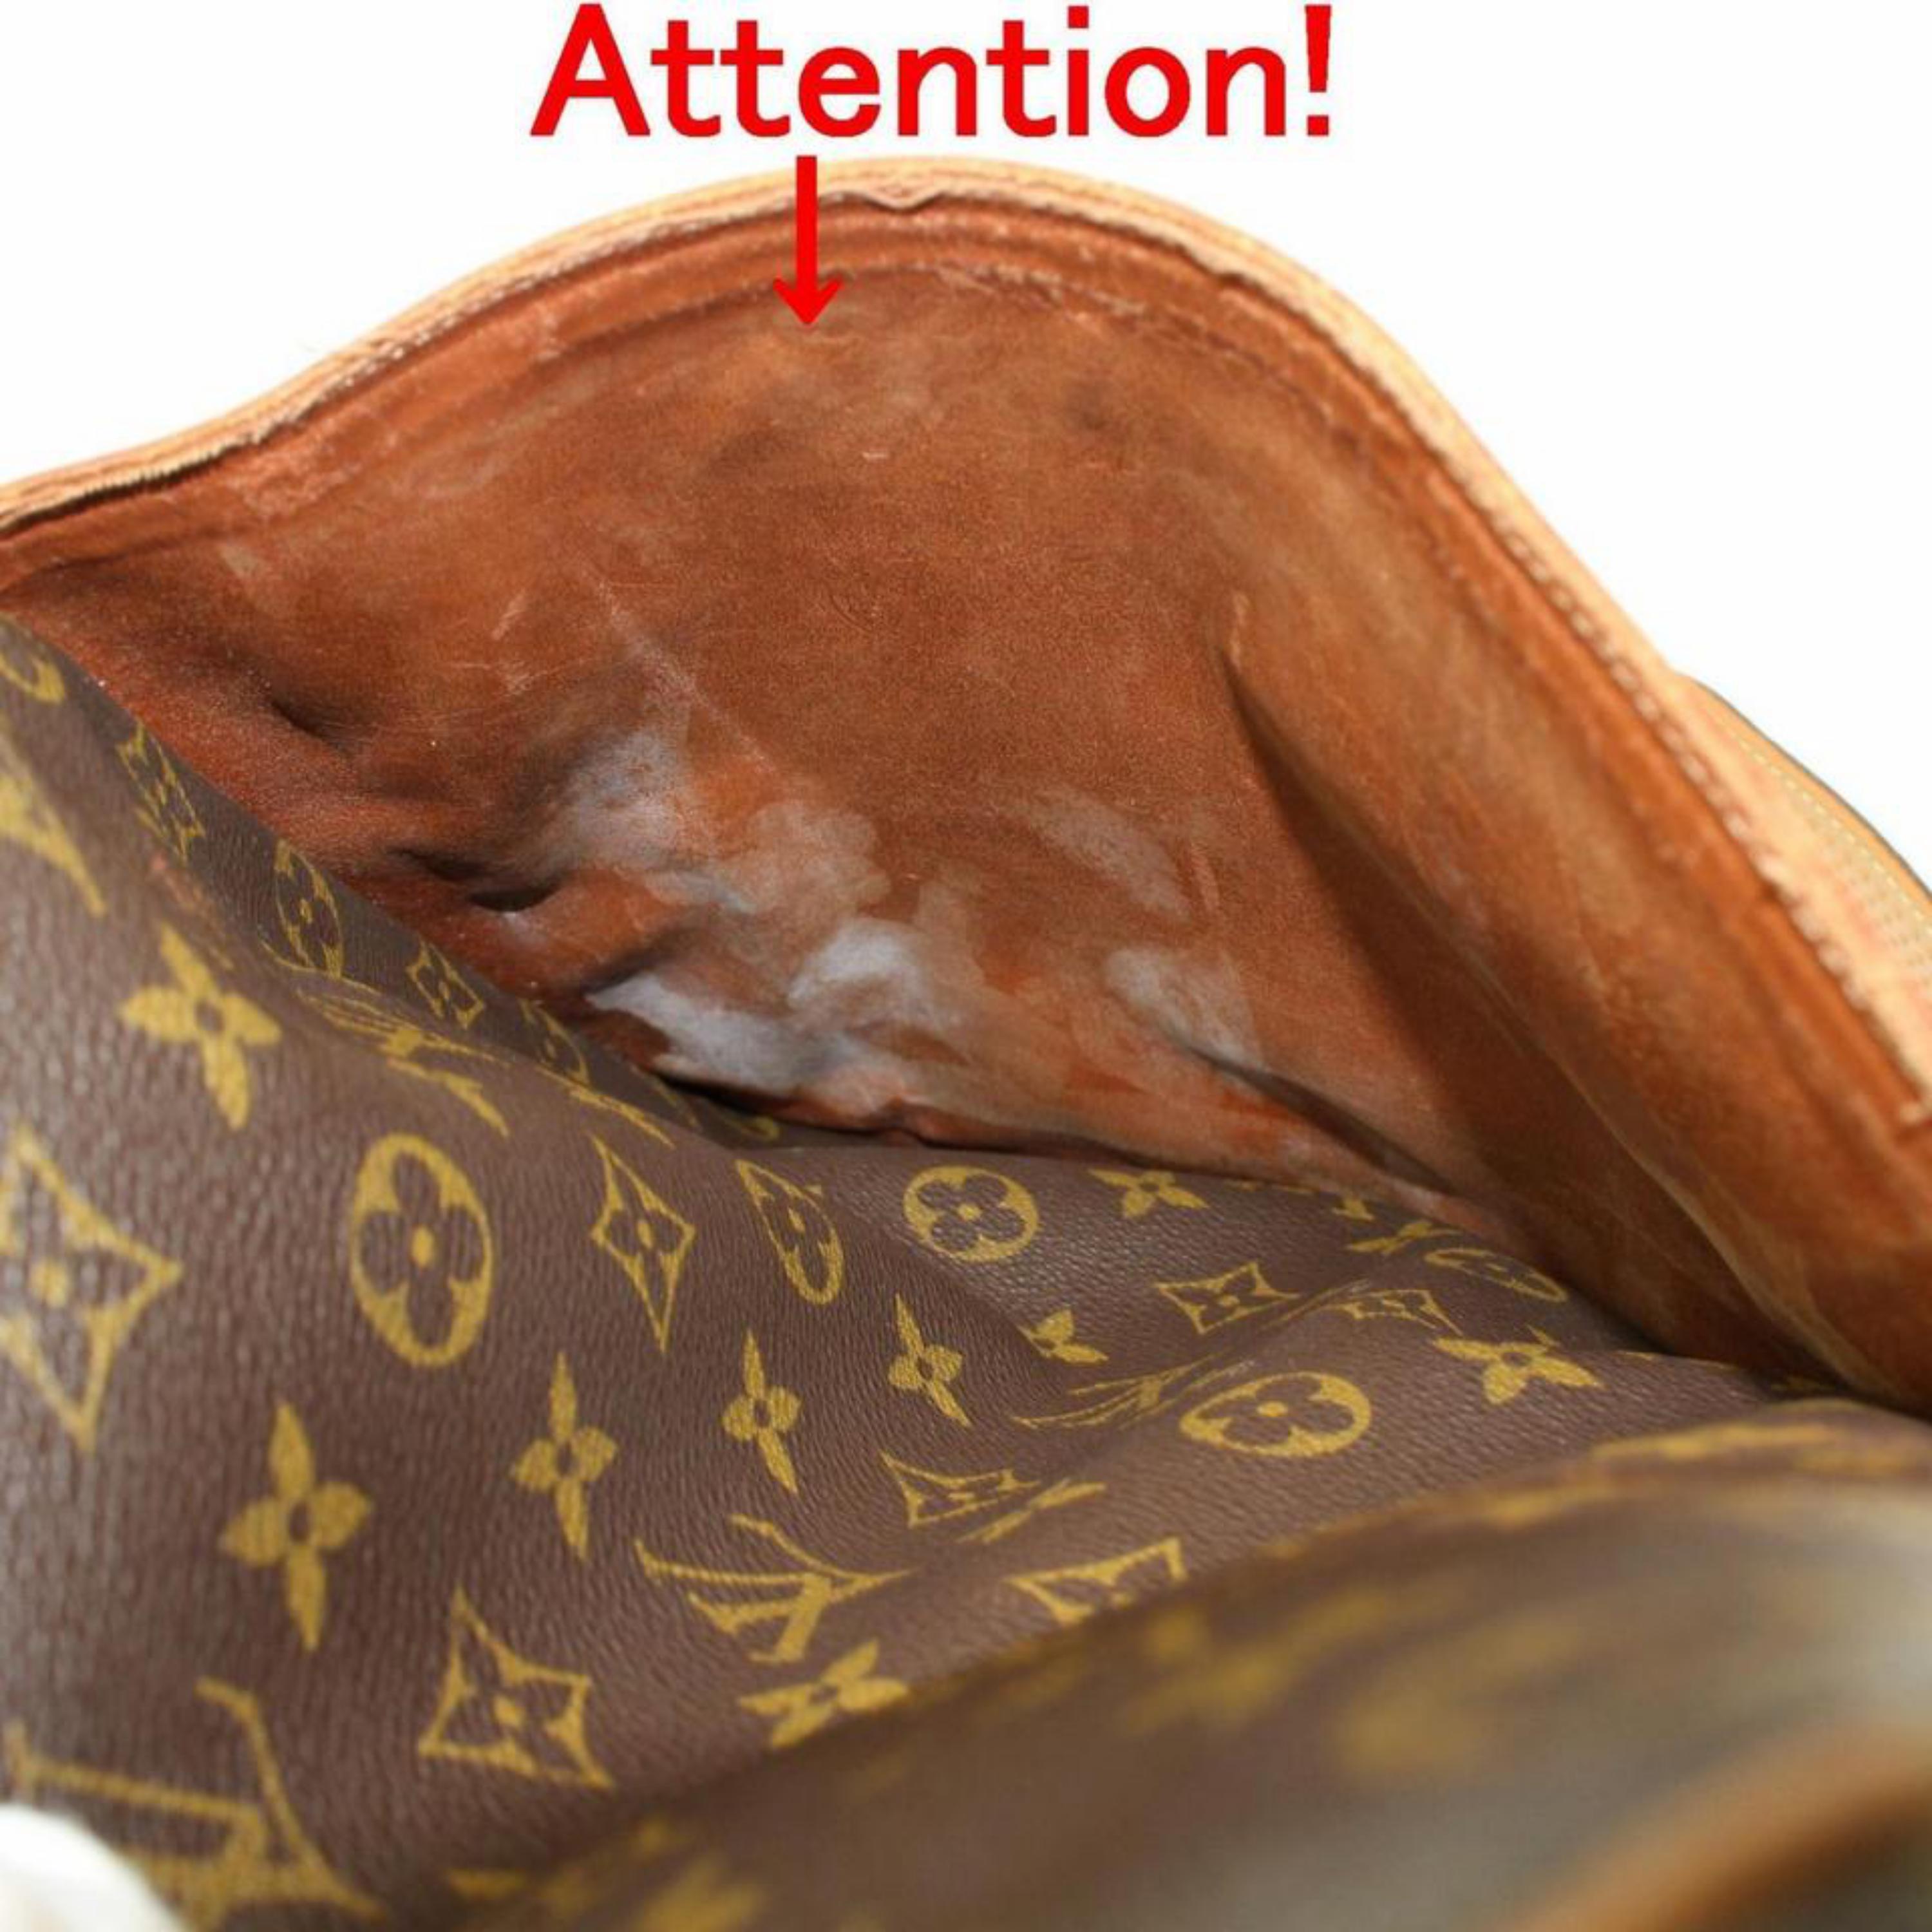 Louis Vuitton Danube Extra Large Gm 866573 Brown Coated Canvas Shoulder Bag For Sale 6